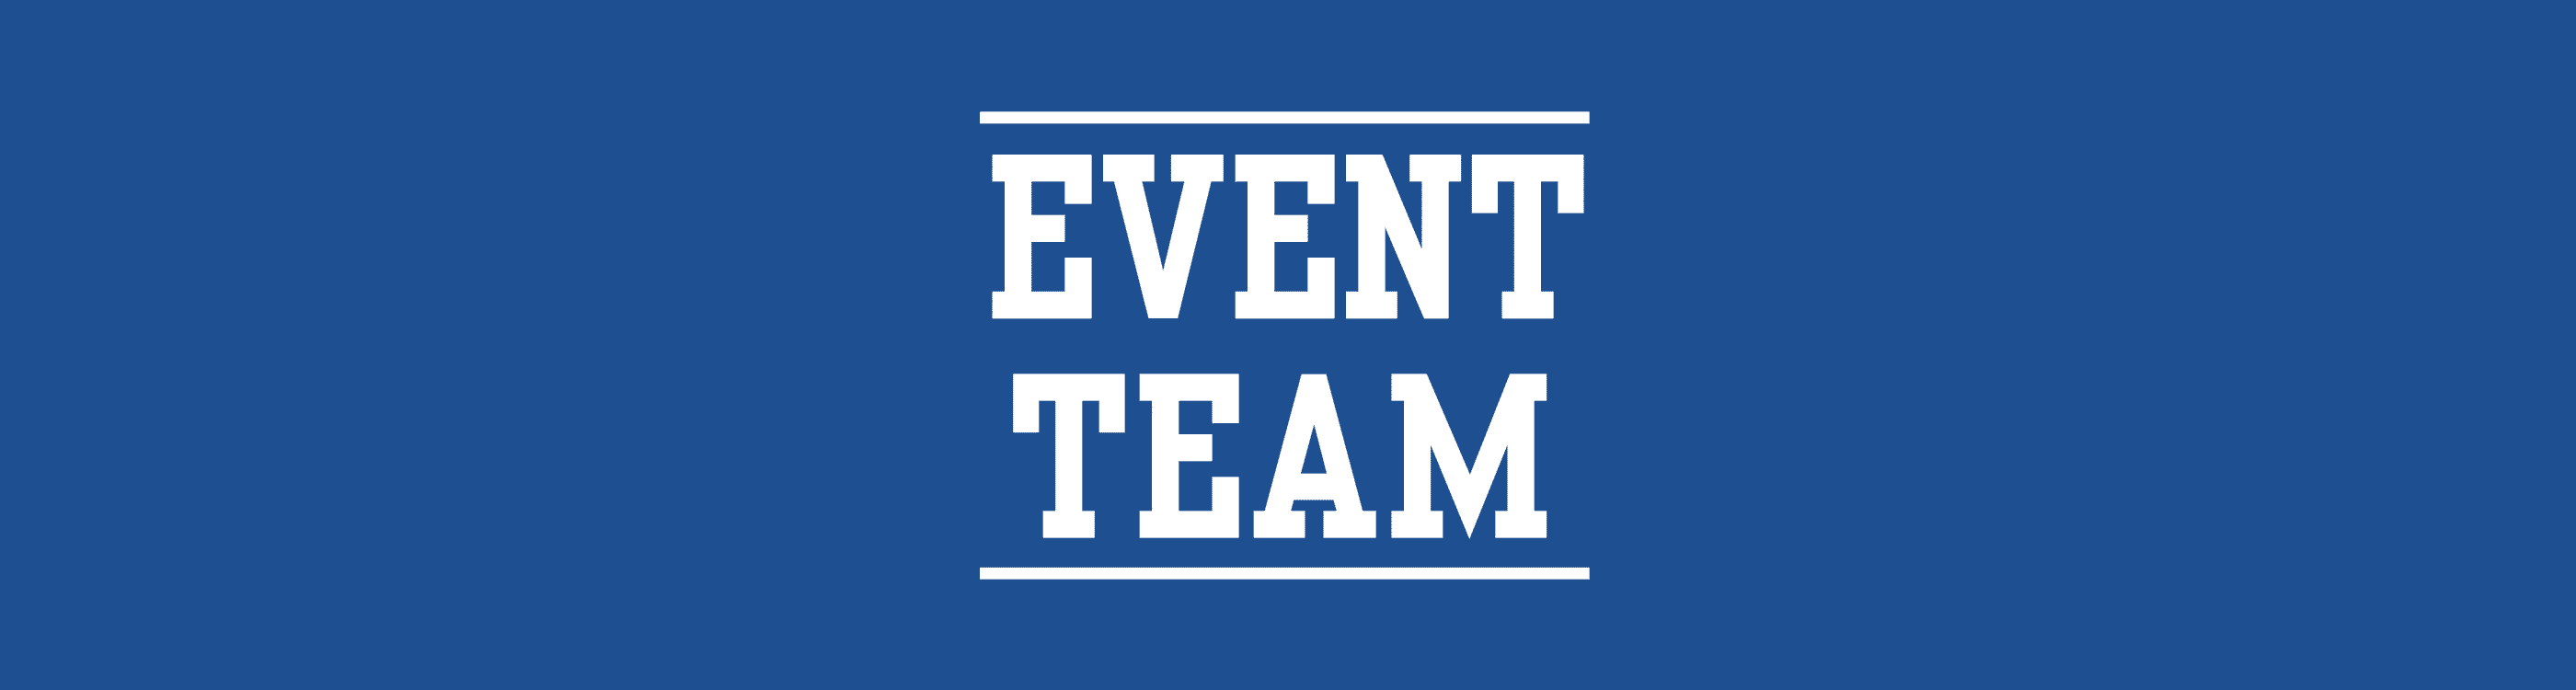 Join our Event Team!